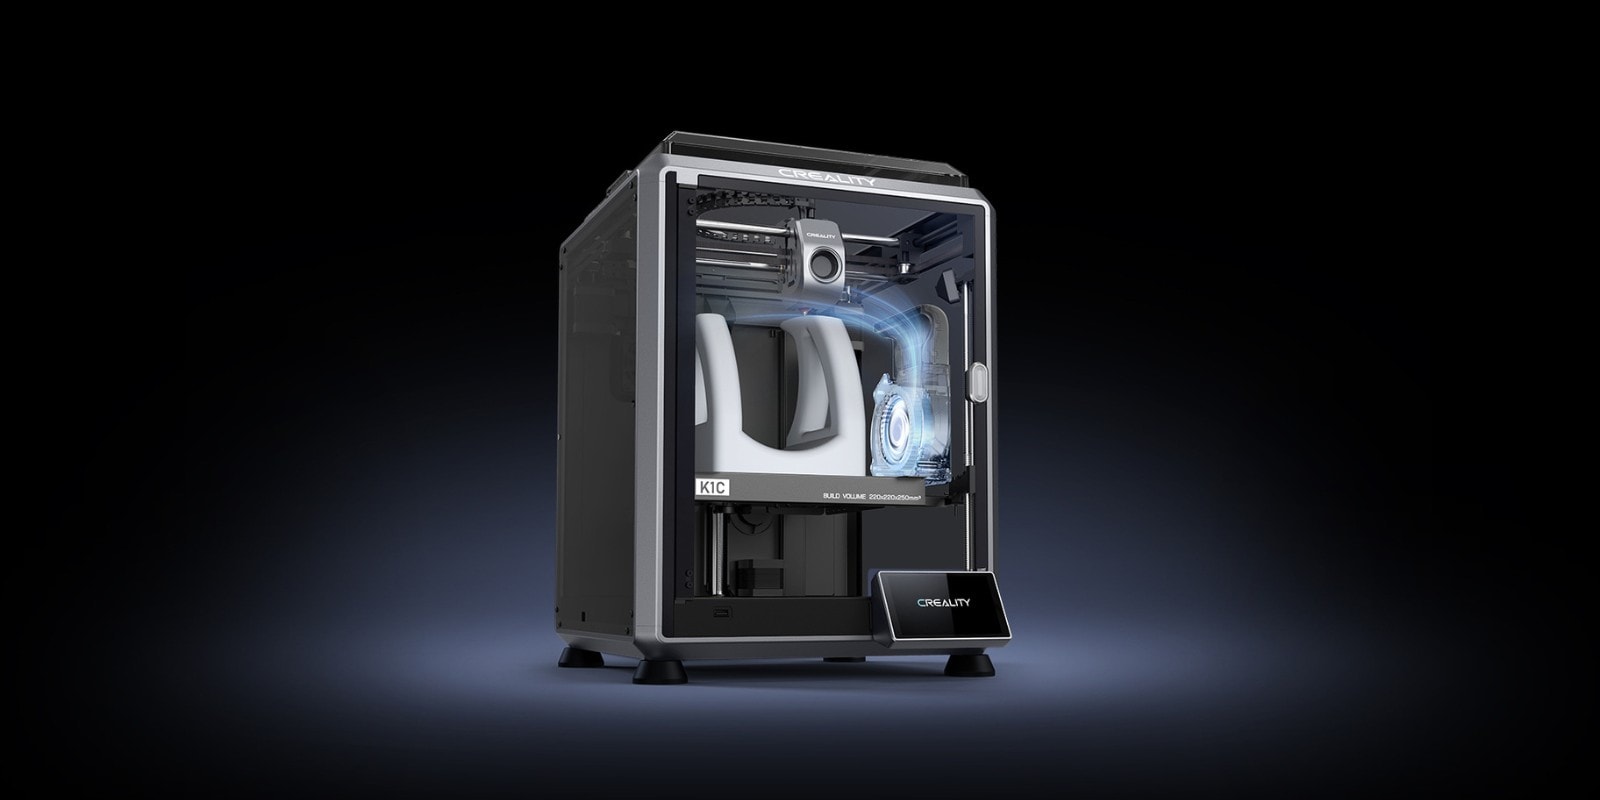 The Creality K1C fast 3D printer on a black background.